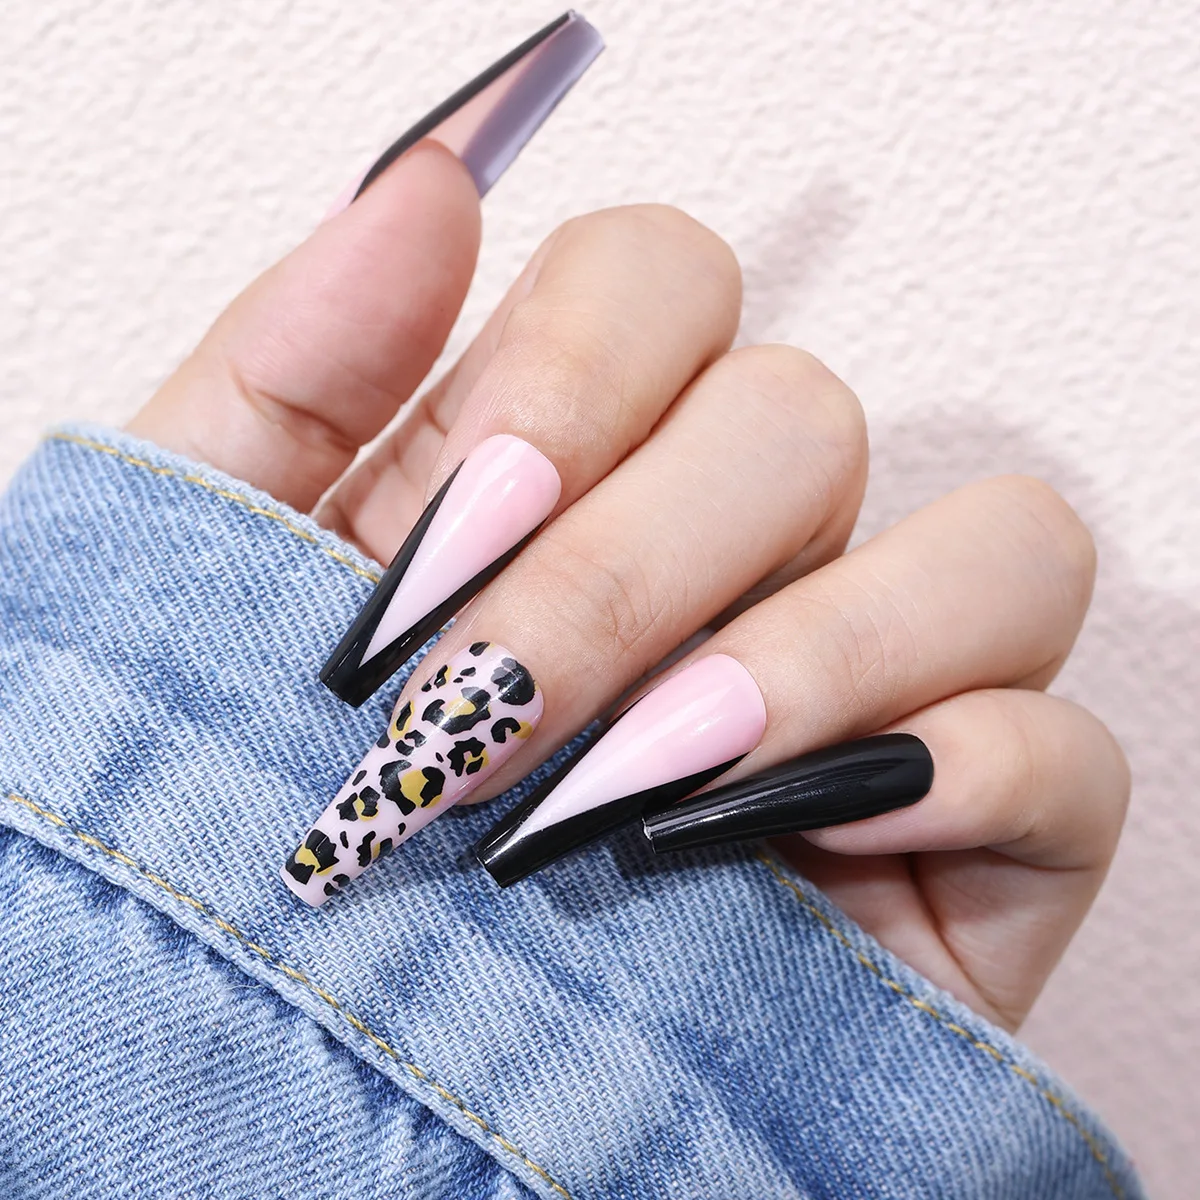 MSHARE Russian Almond Forms Nails Tips For Nail Extension Building Acrylic  Gel Tip 12 Size 2940119 From C2vt, $16.07 | DHgate.Com